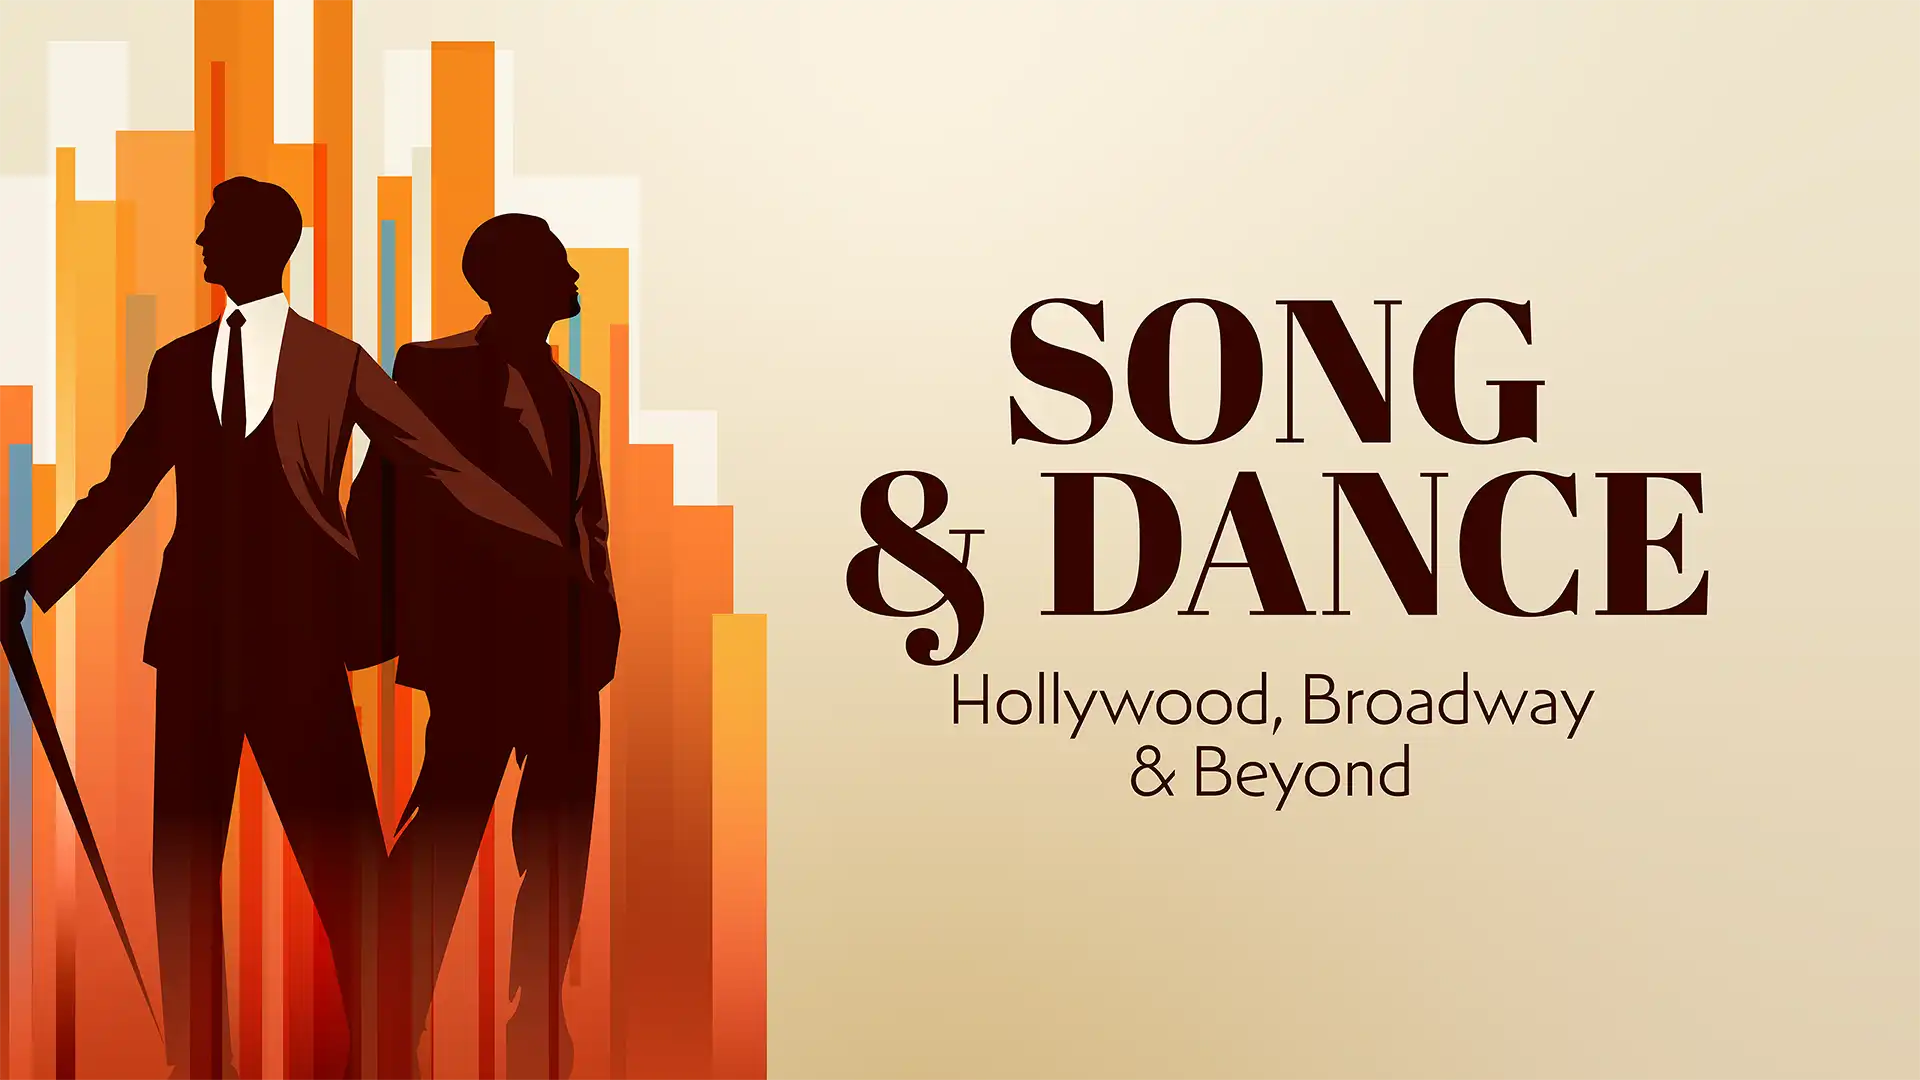 Art with "Song & Dance" in brown font with profiles of two people standing side by side.